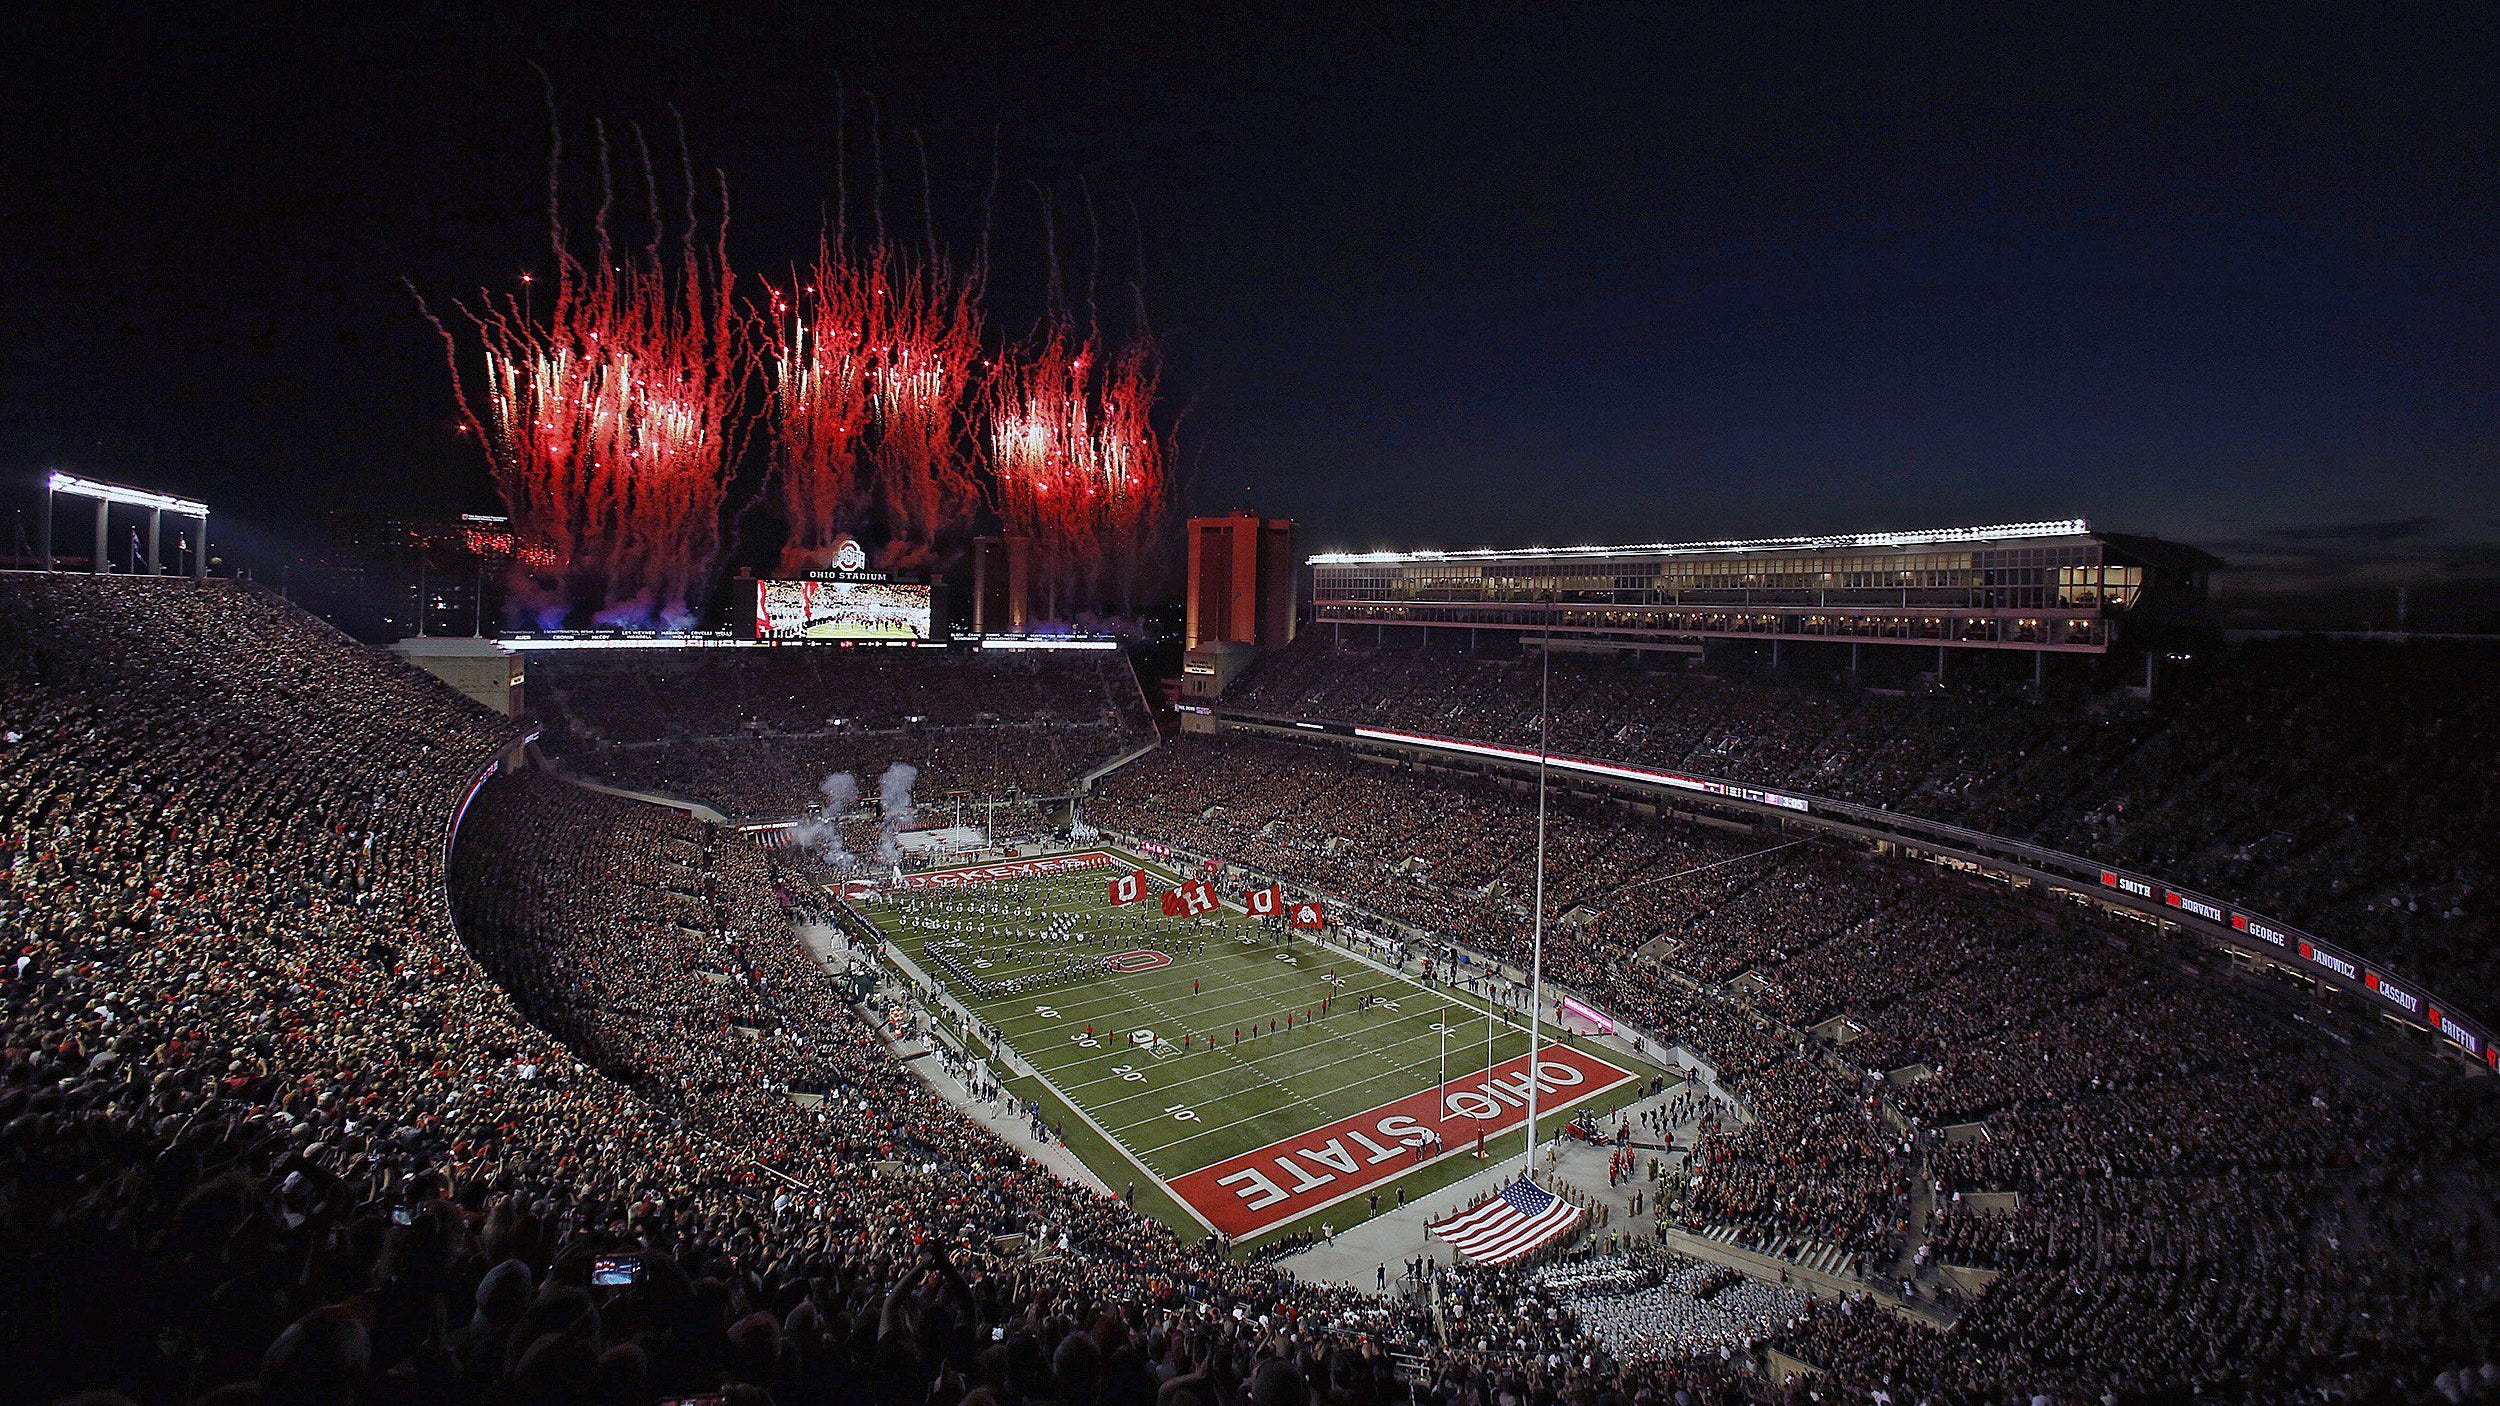 Ohio State plans to limit Ohio Stadium capacity to 20 for football games